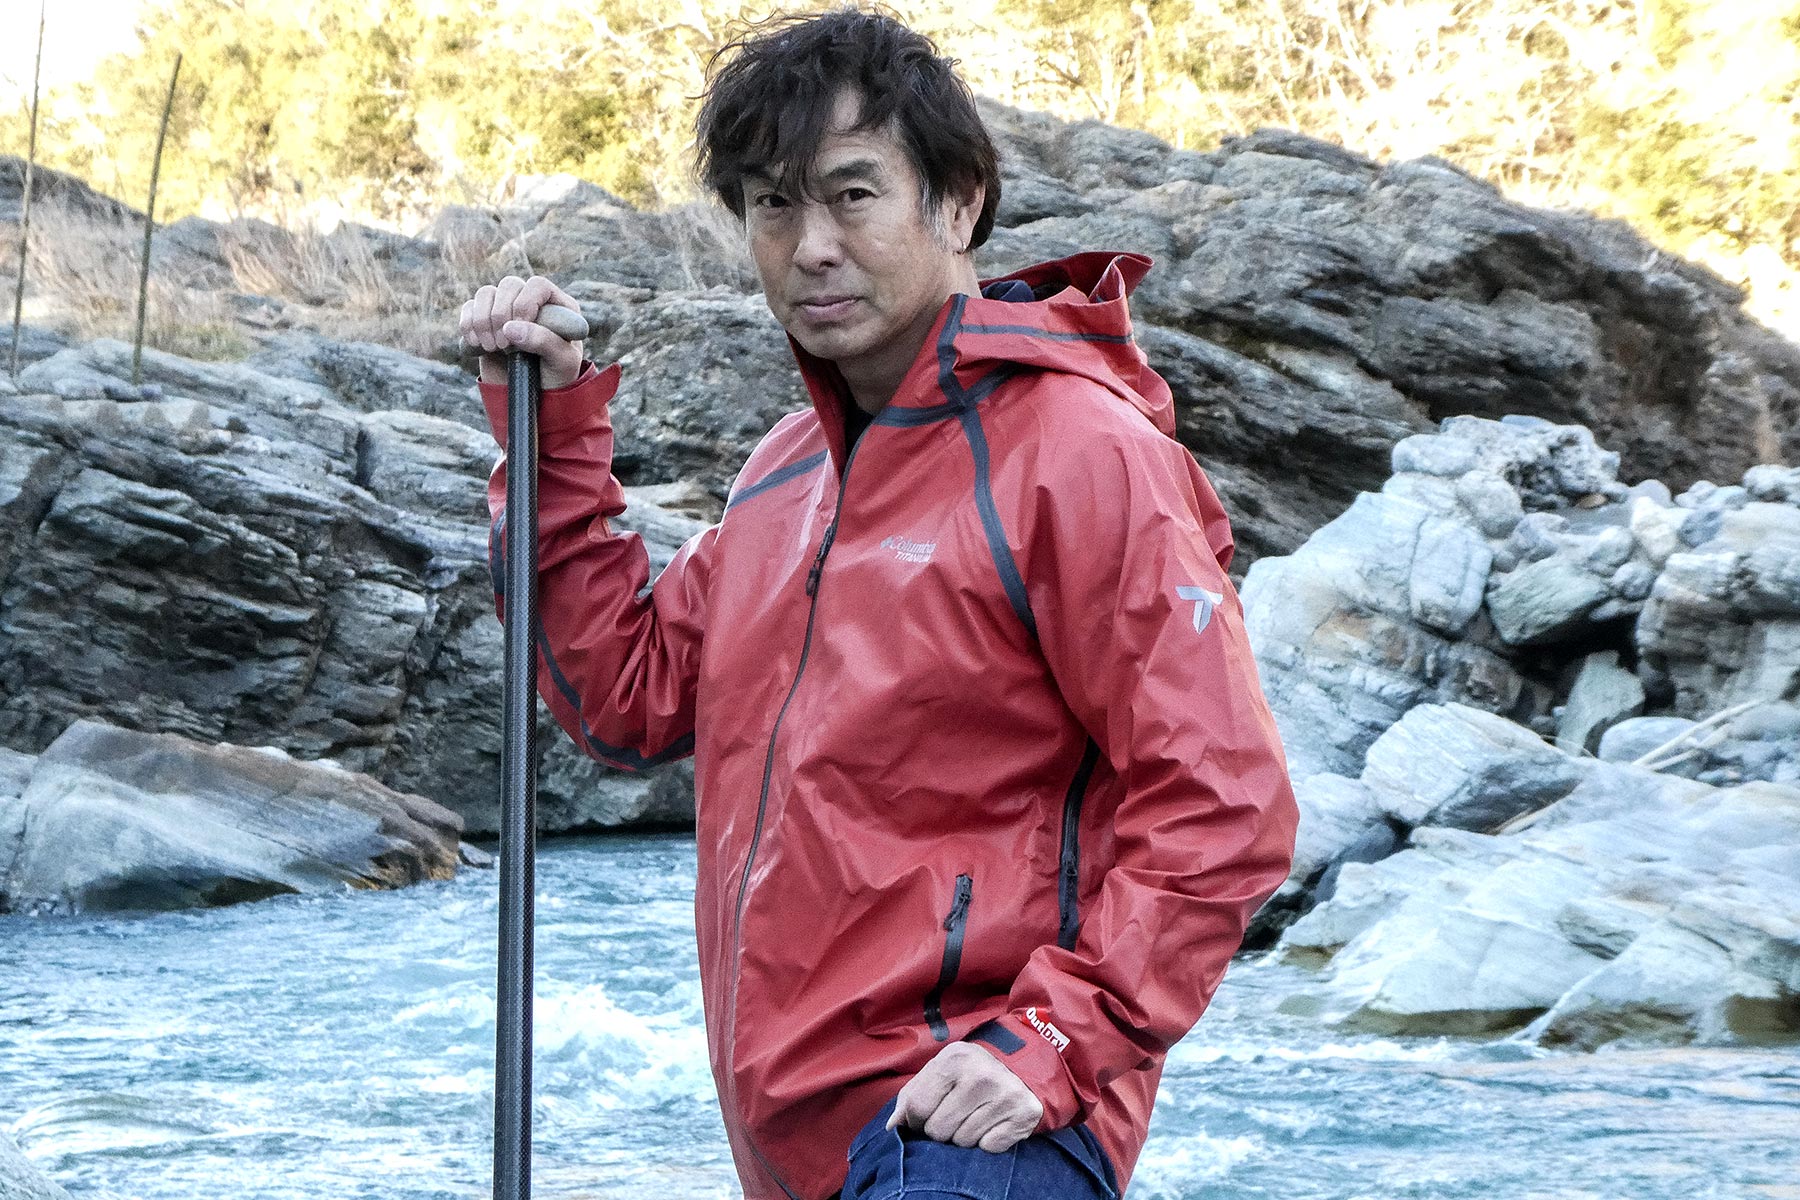 Outdry Extreme Reign Jacket ラフティングガイド・堅村浩一さん